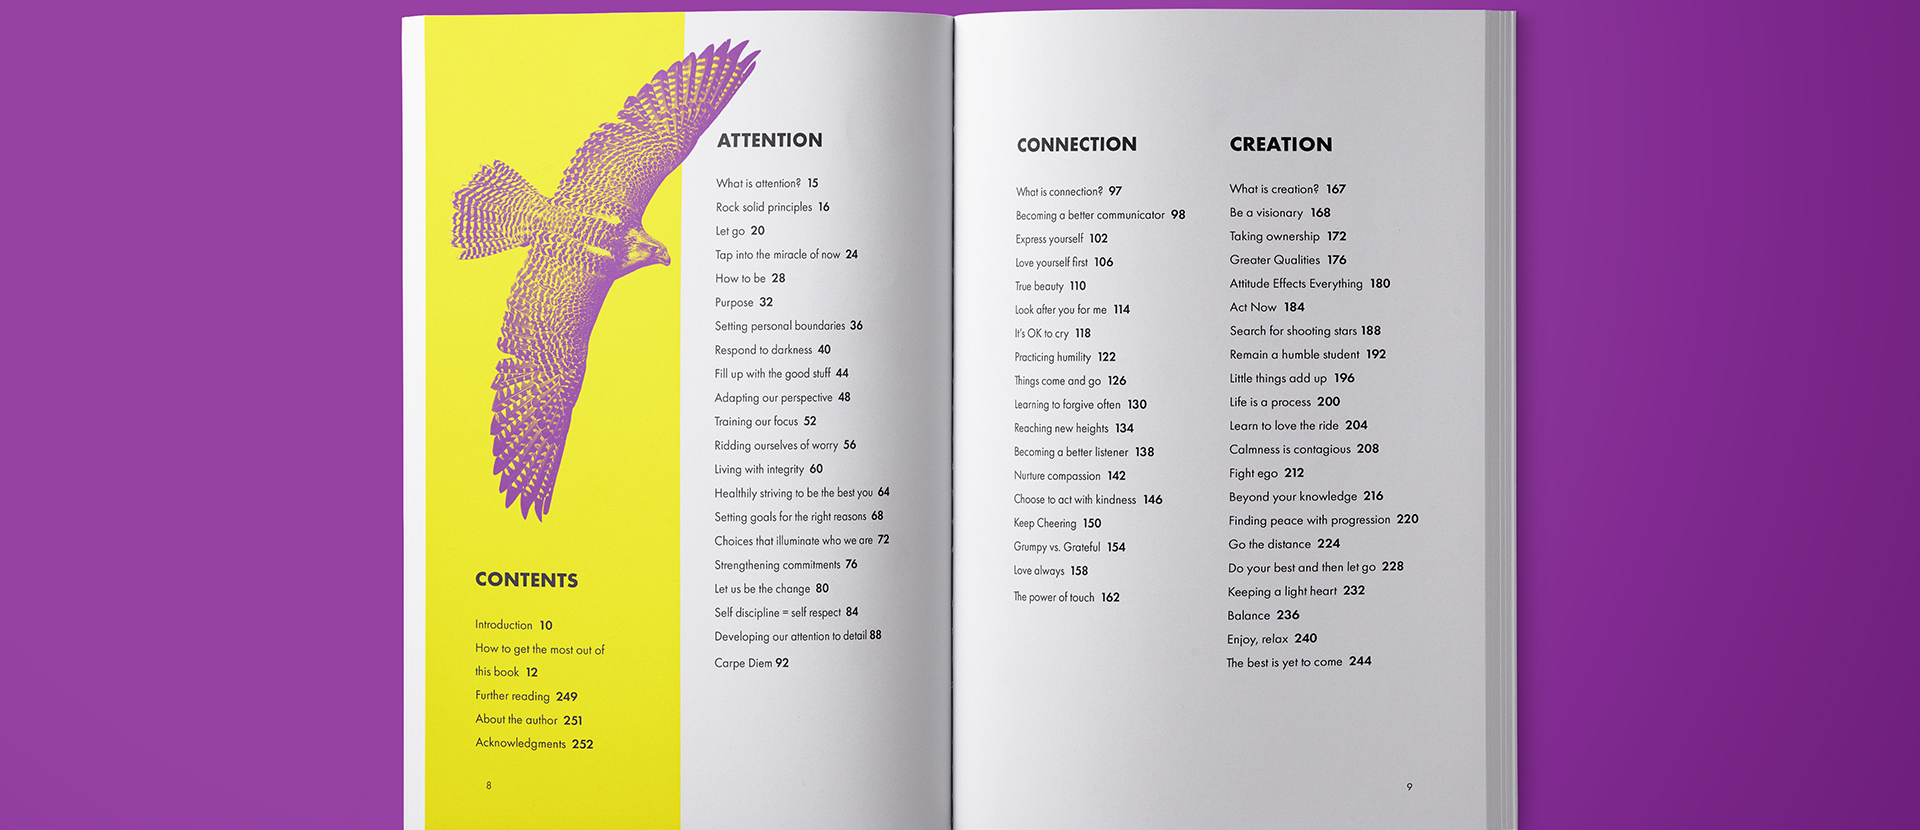 The degree show brochure